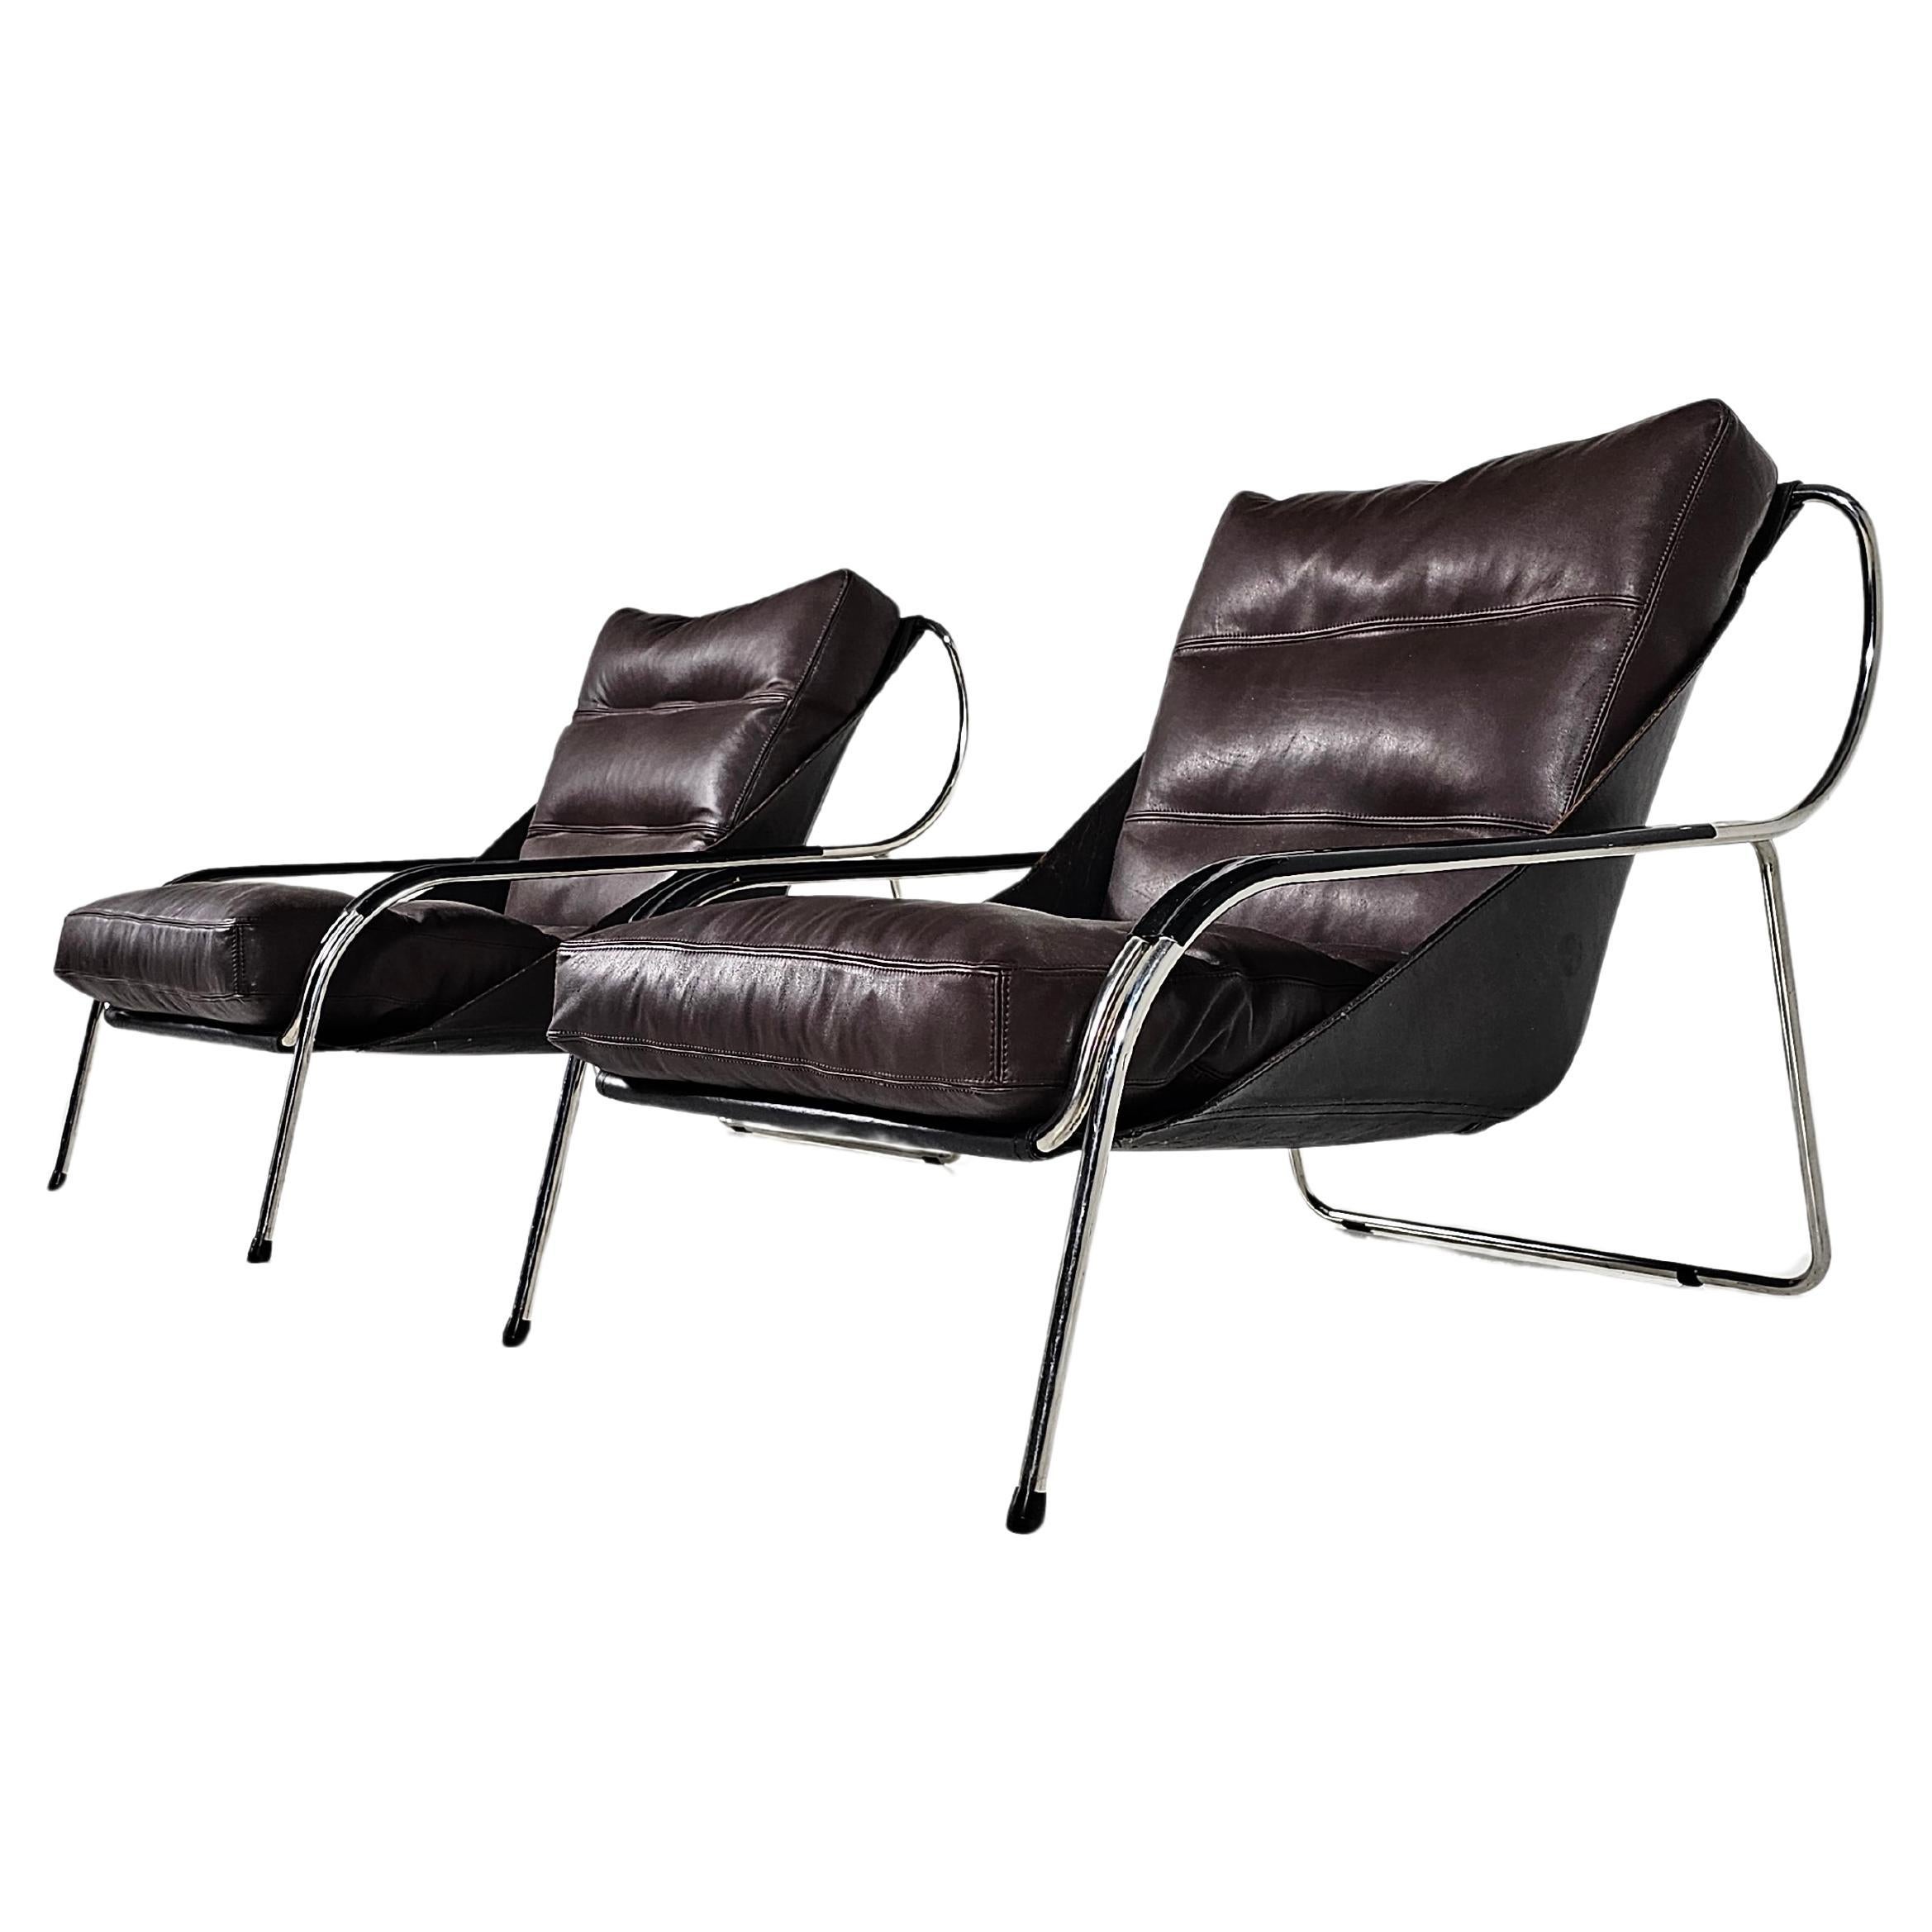 1st edition Maggiolina chairs by Zanotta designed by Marco Zanuso, the 1950s. The black cowhide sling supports one large newly upholstered brown leather cushion with a goose feather filling.  A stainless steel frame supports this very comfortable